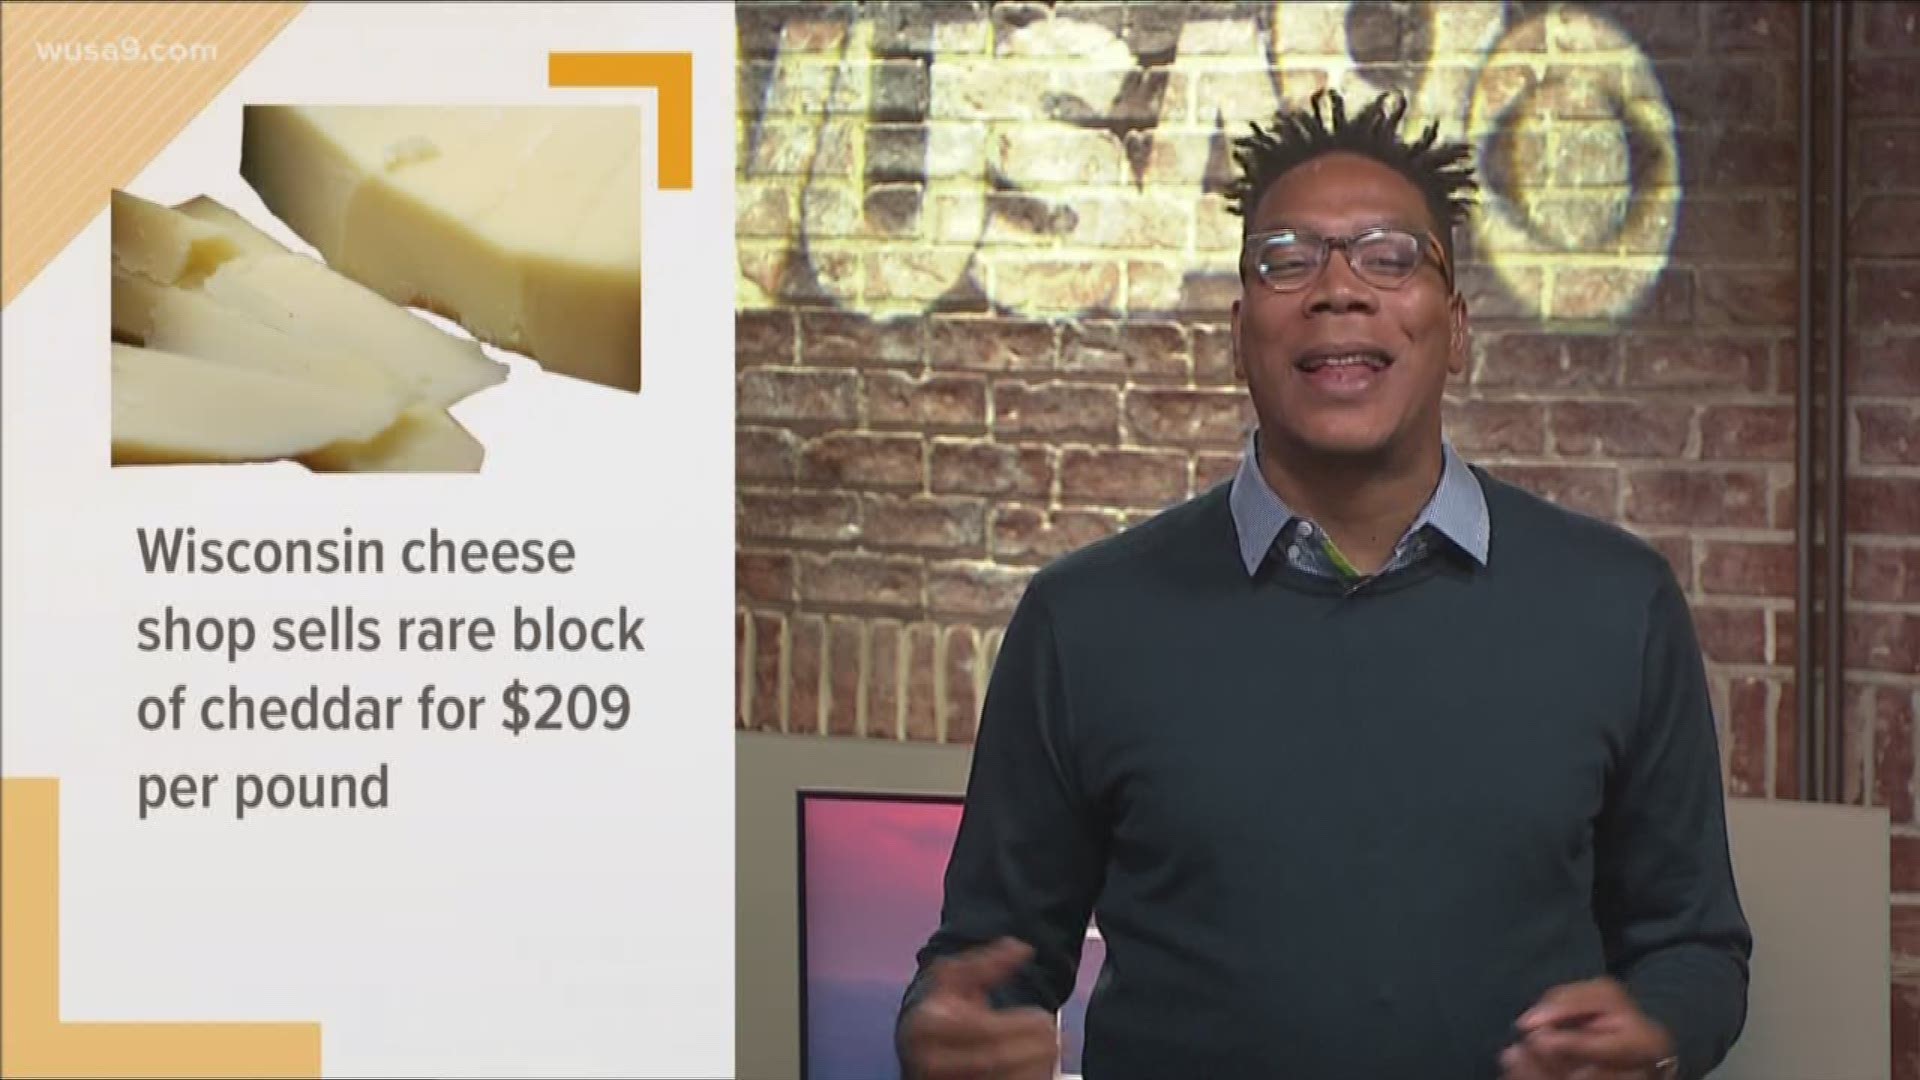 A Wisconsin cheese shop is selling a super rare cheese for $209 a pound. This is In Other News, with news that isn't on your radar but should be.